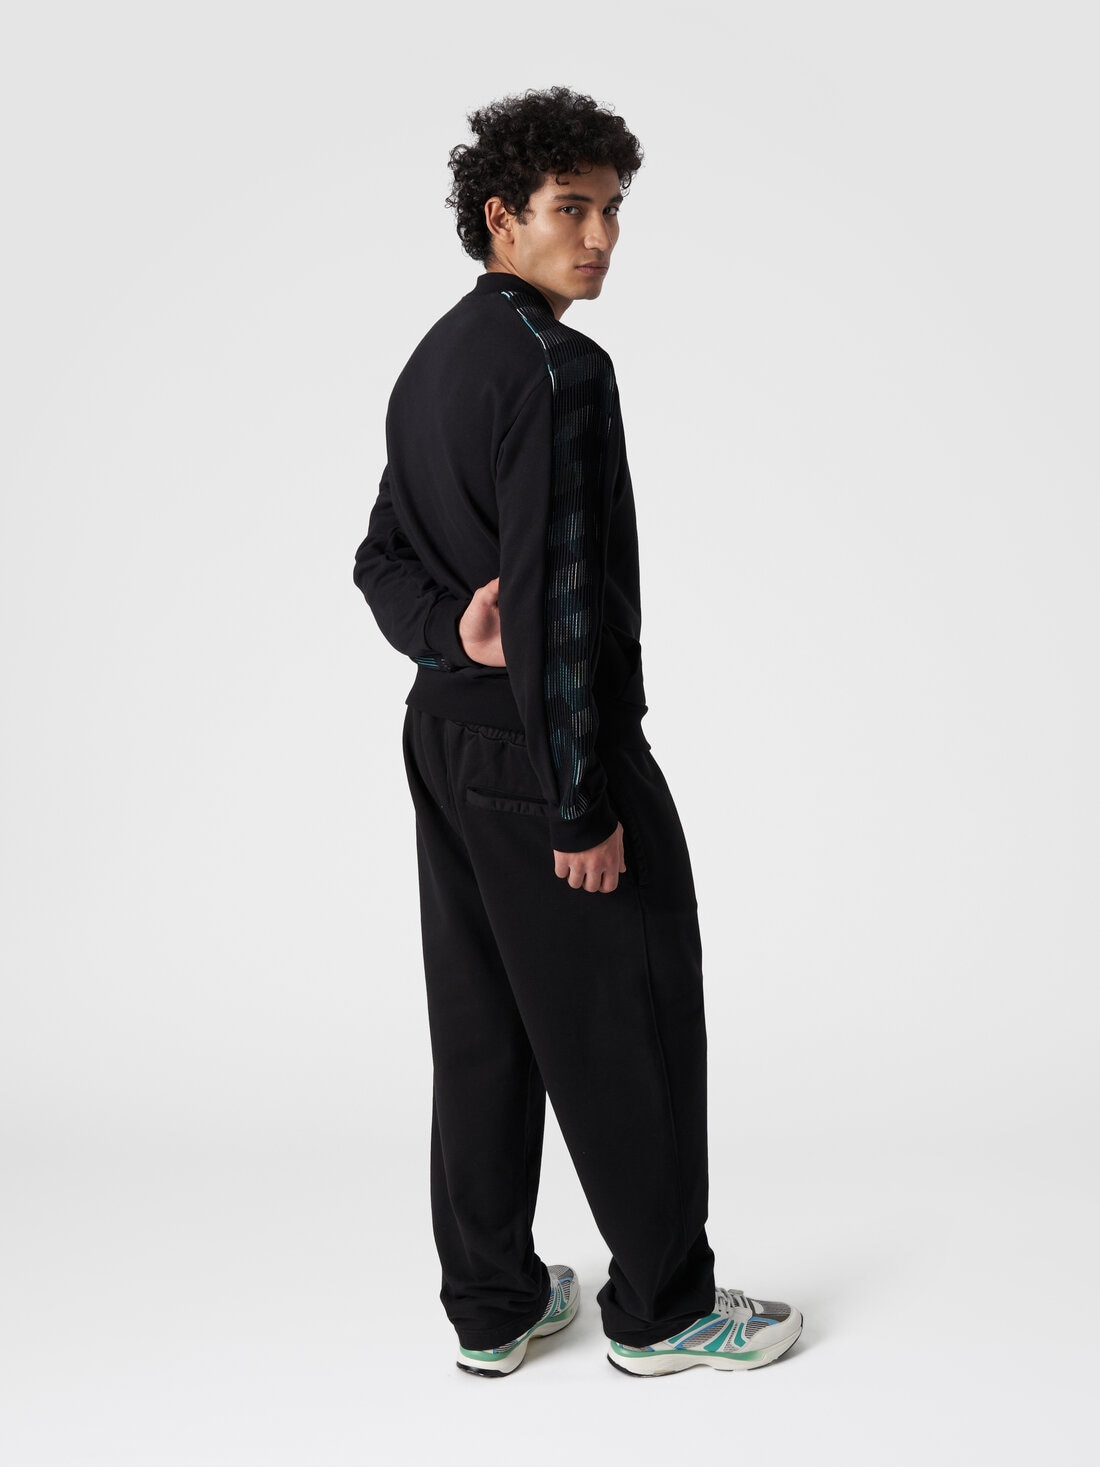 Trousers in cotton fleece with logo, Black    - TS24SI00BJ00H0S91J4 - 3